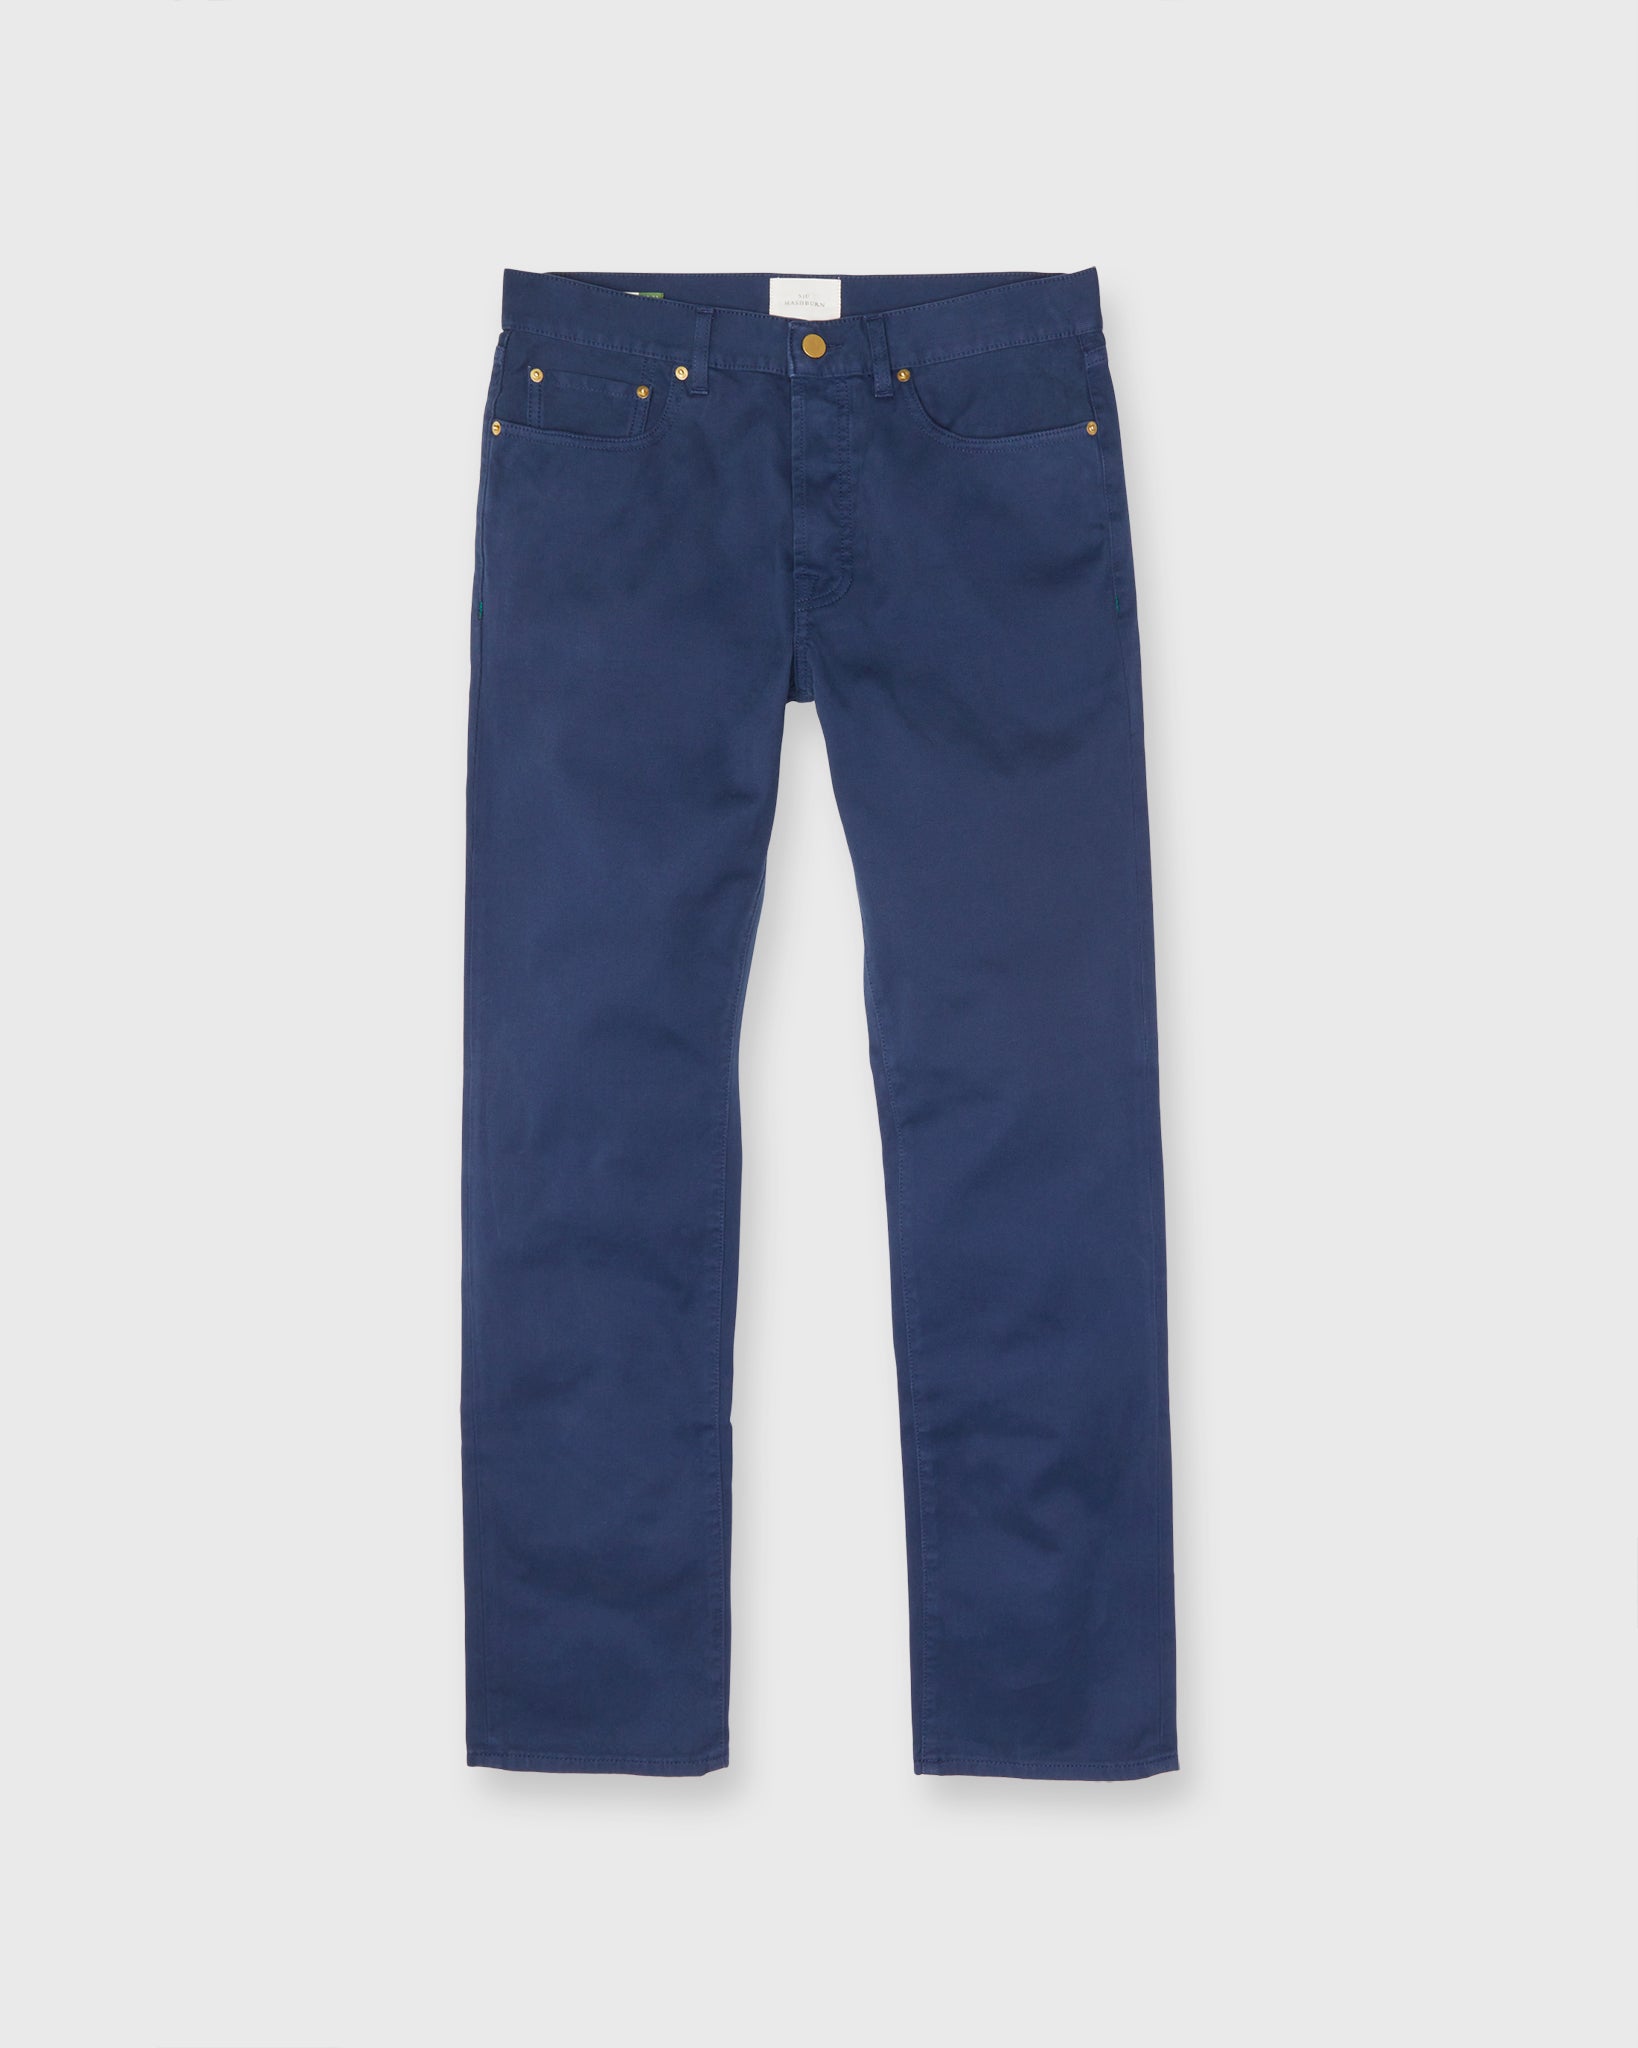 Slim Straight 5-Pocket Pant in Pacific Bedford Cord